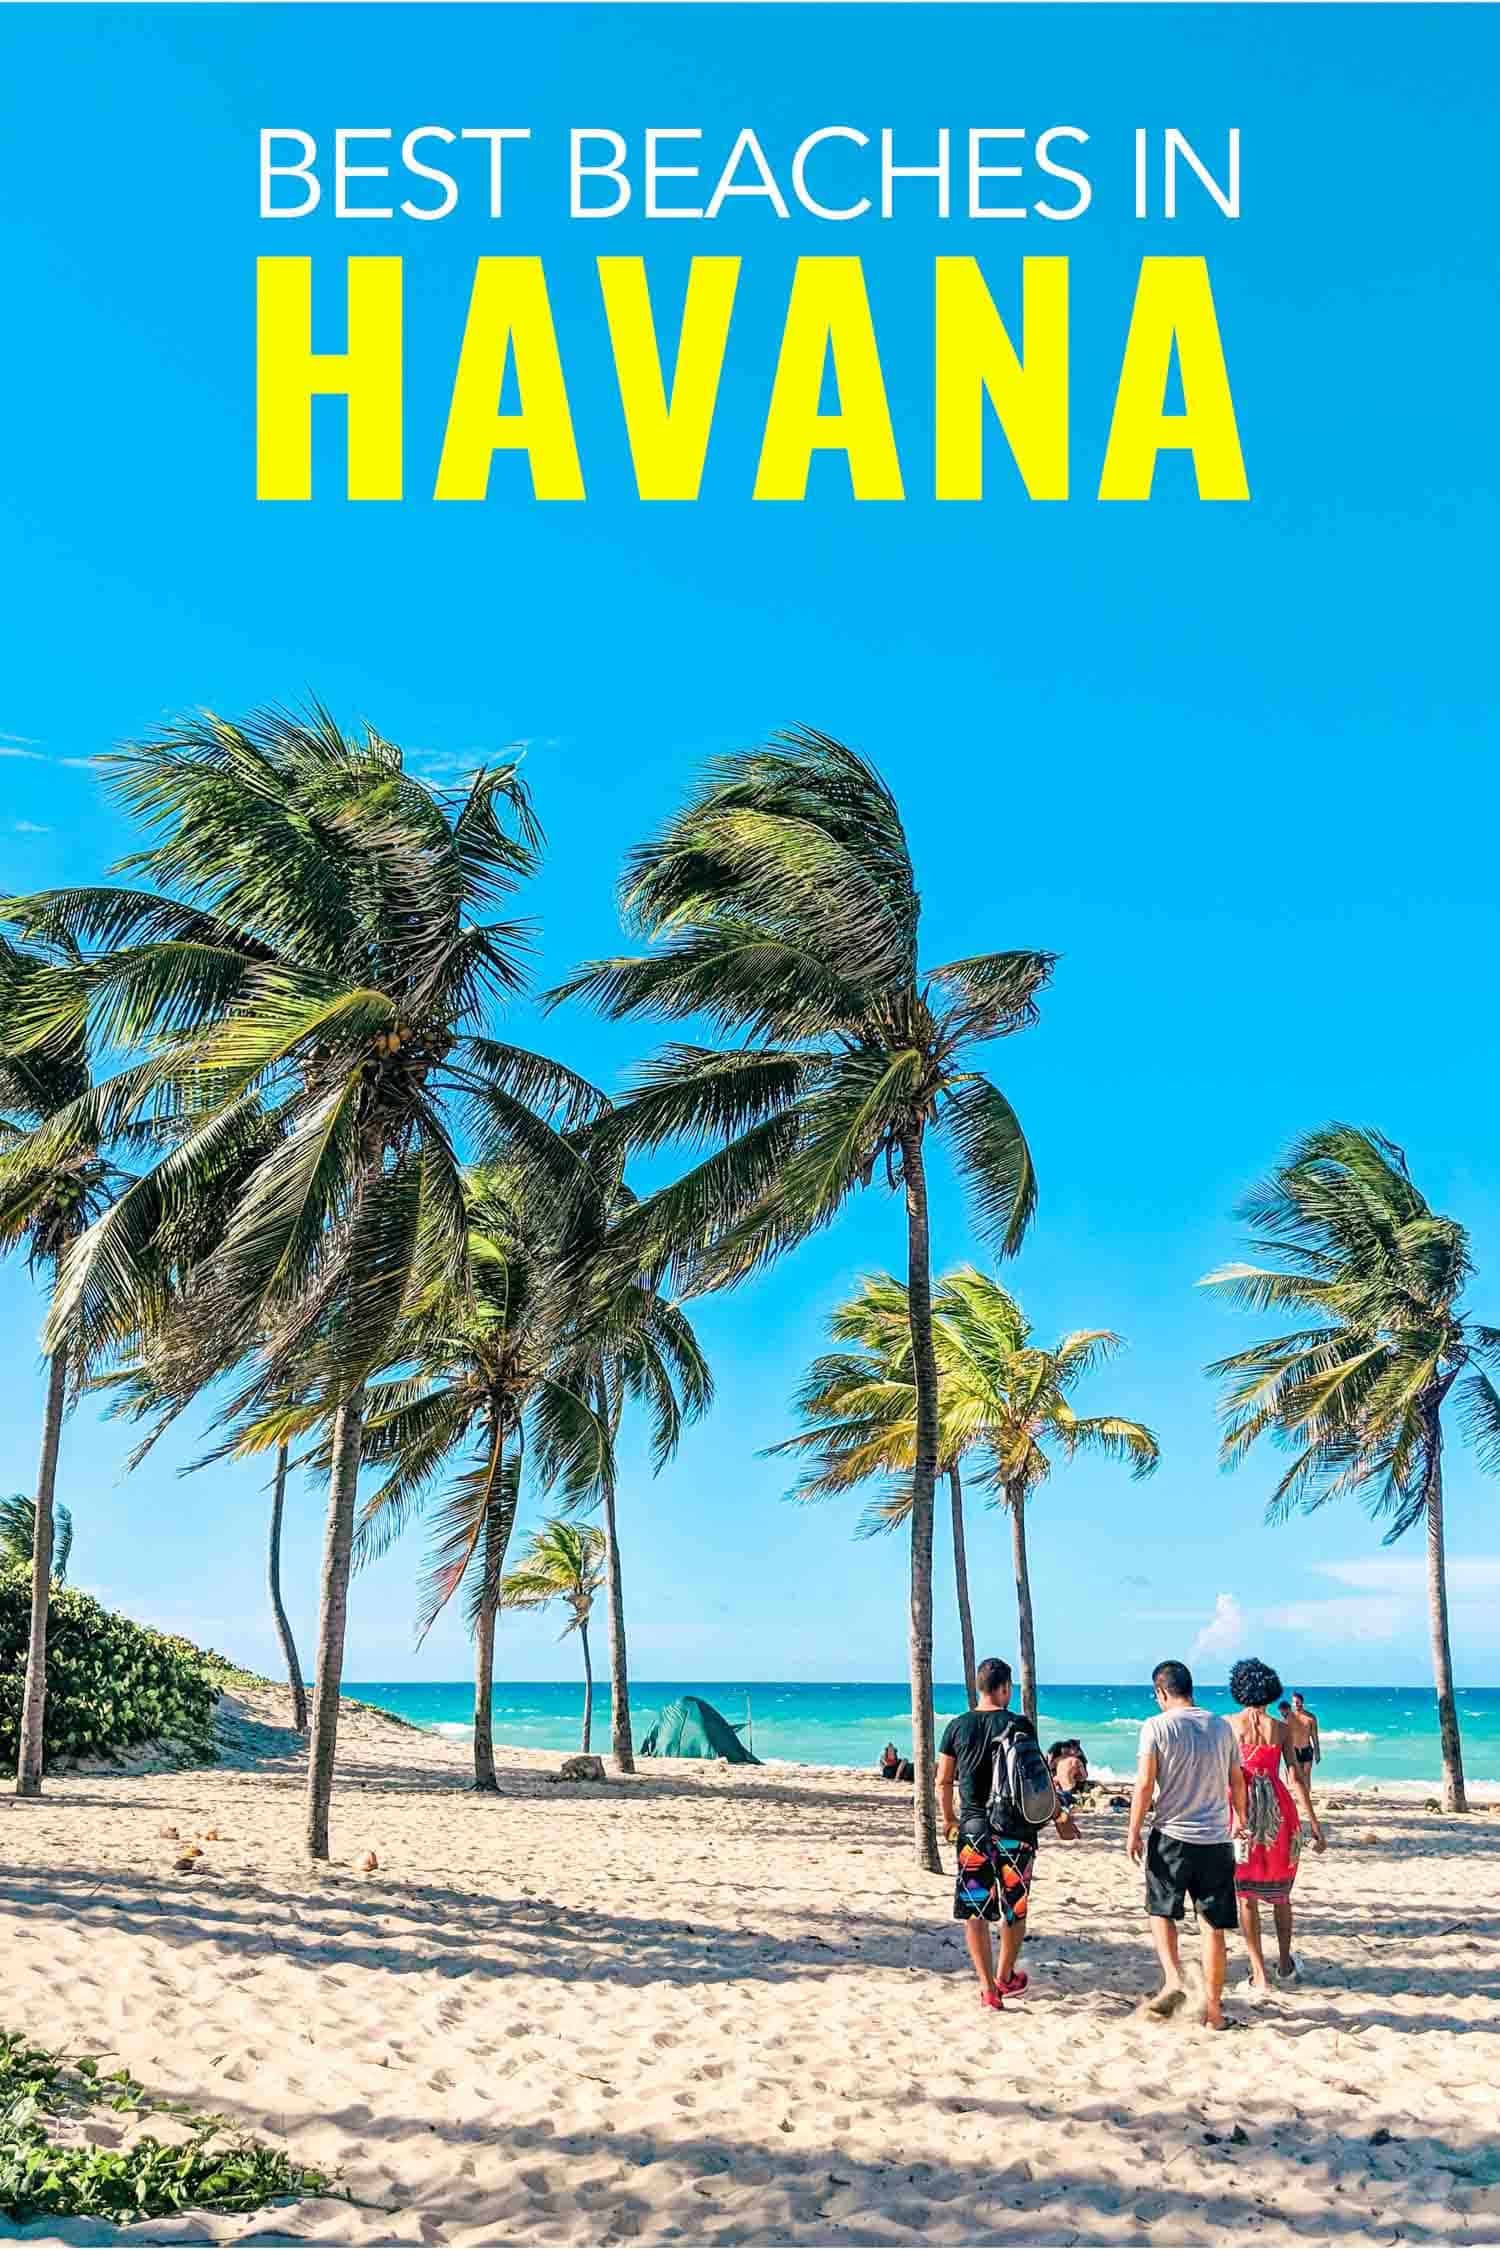 Havana beaches are some of the best beaches in Cuba. Here are the top ones to visit #beach #cuba